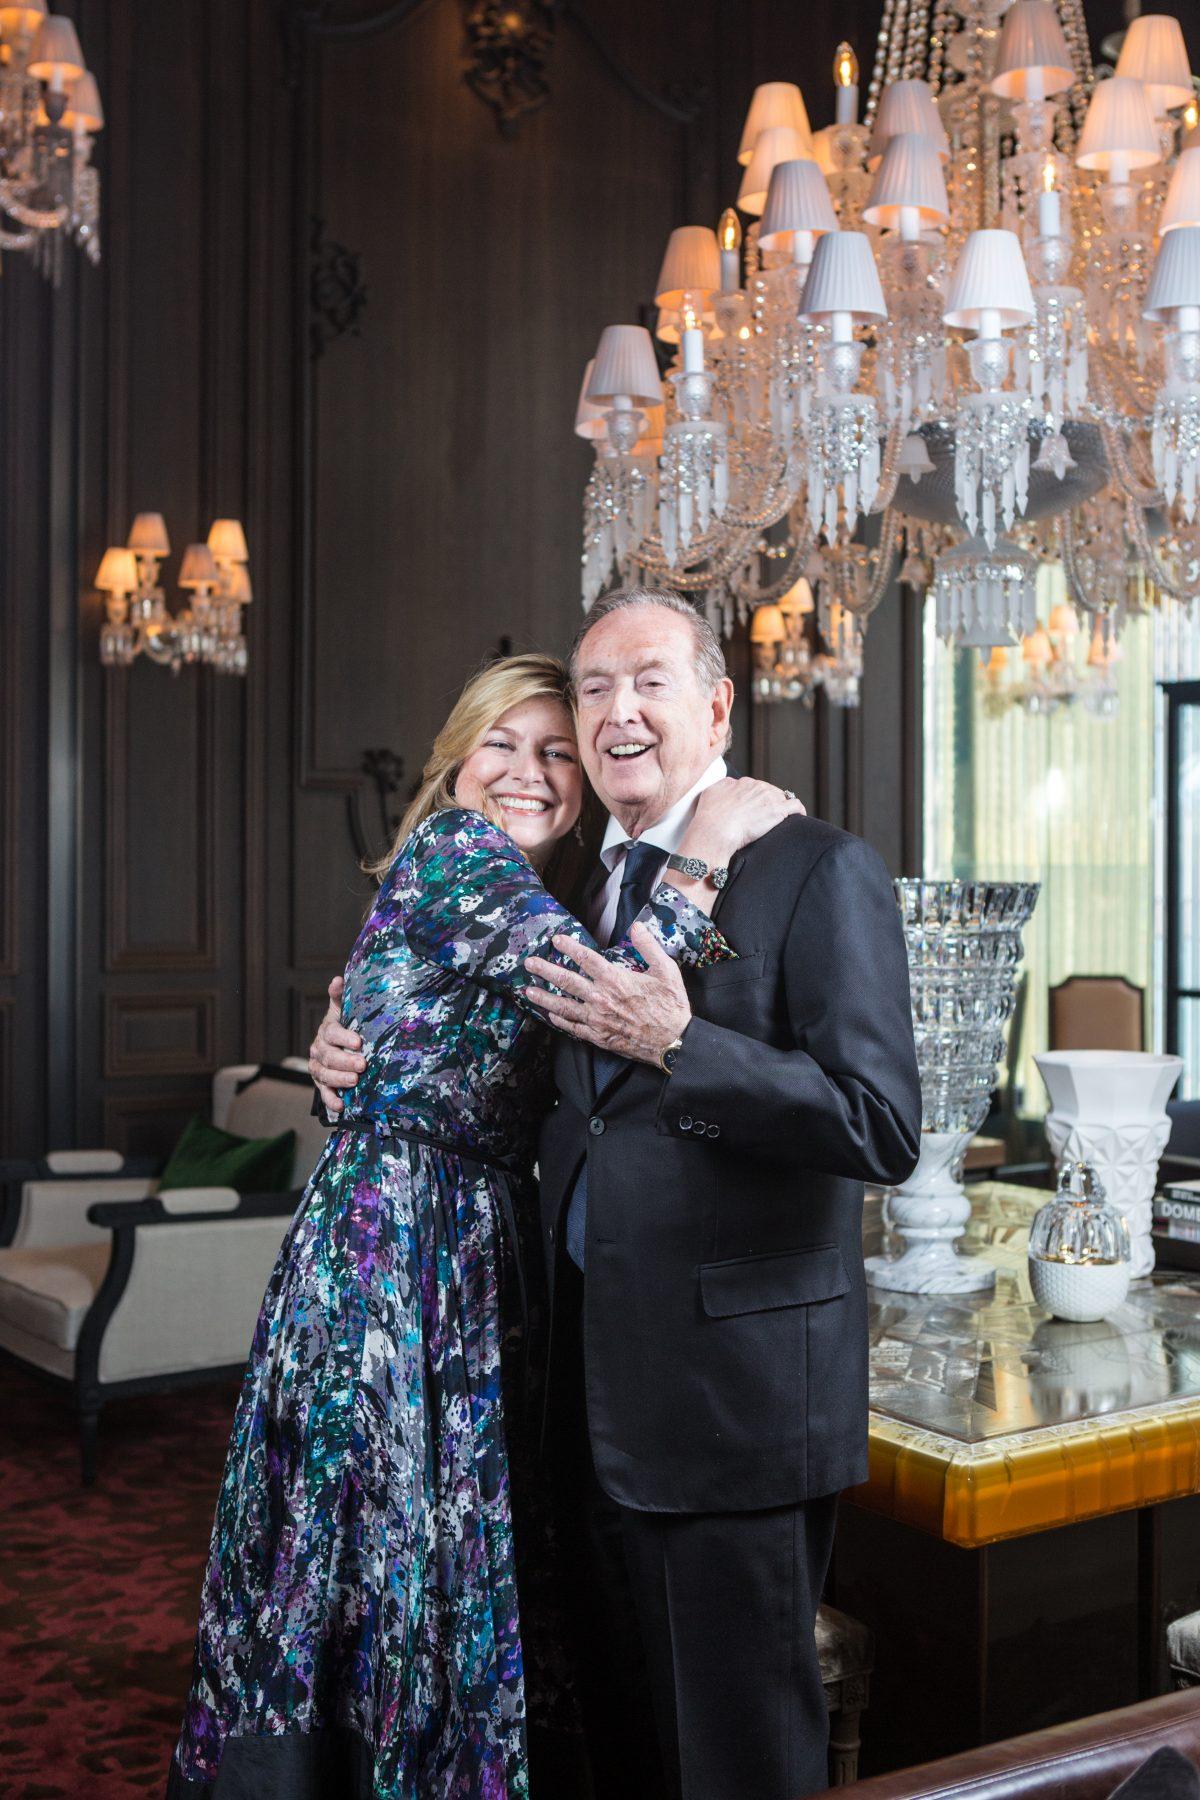 Stacy Fischer-Rosenthal with her father Bill Fischer, founder of the Fischer Travel Enterprises, inside the Petite Salon at the new Baccarat Hotel in Midtown Manhattan on April 15, 2015. (Samira Bouaou/Epoch Times)